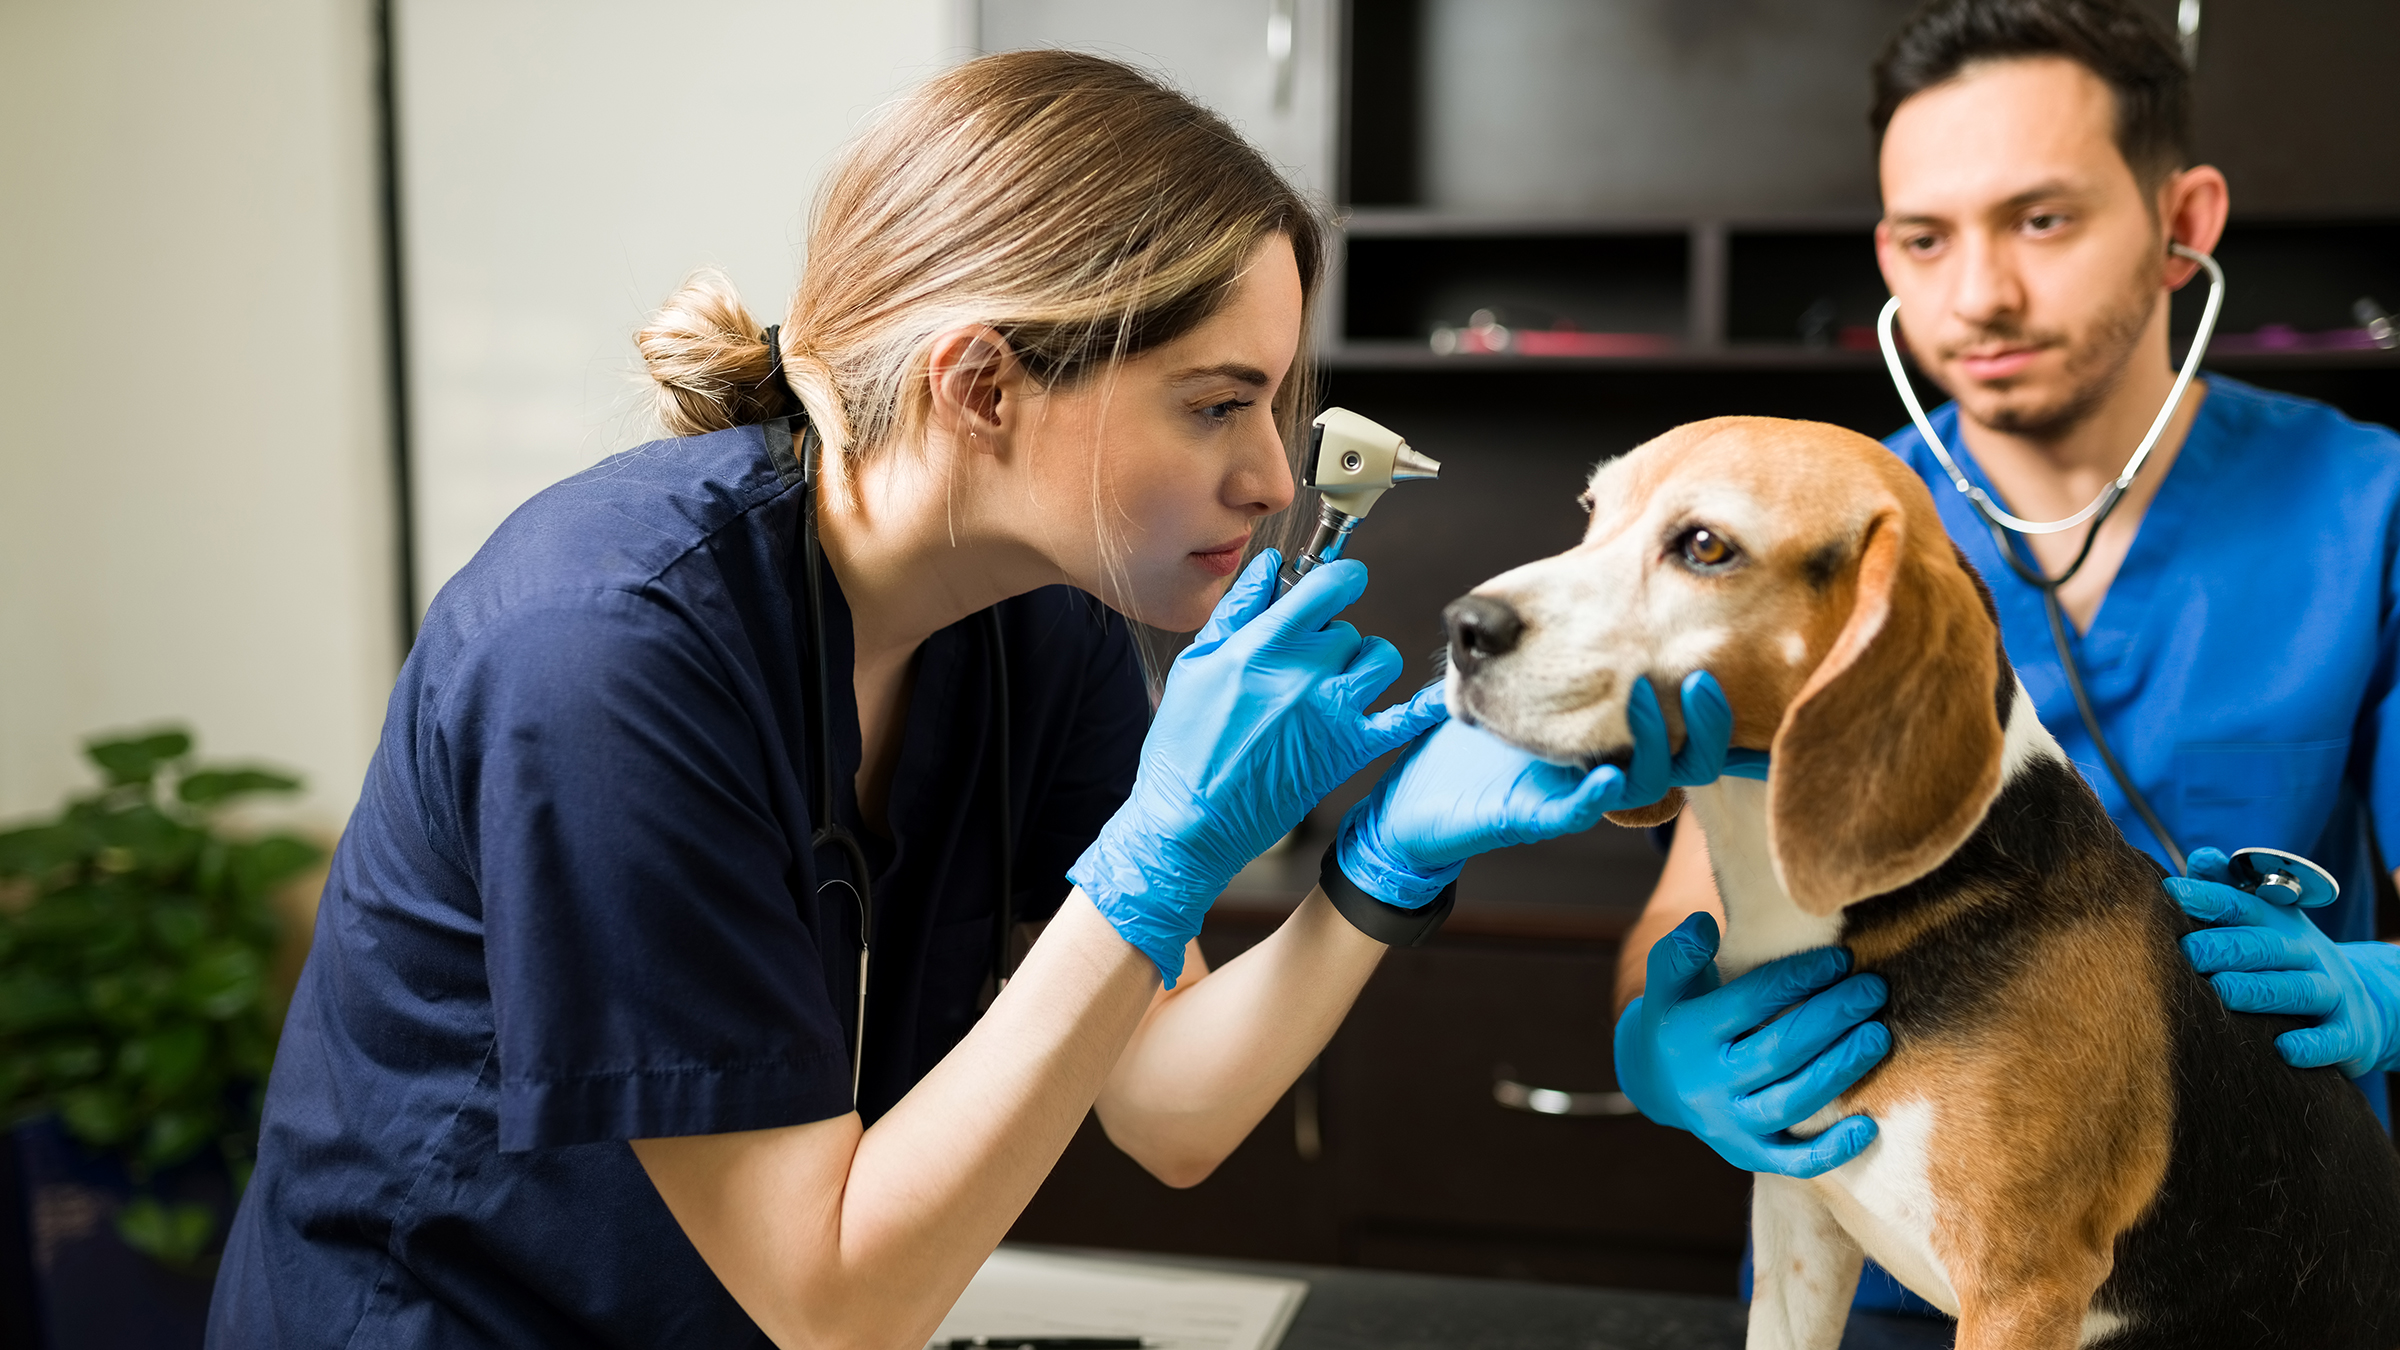 Where Do I Find Free and Low-Cost Pet Vaccinations? - GoodRx